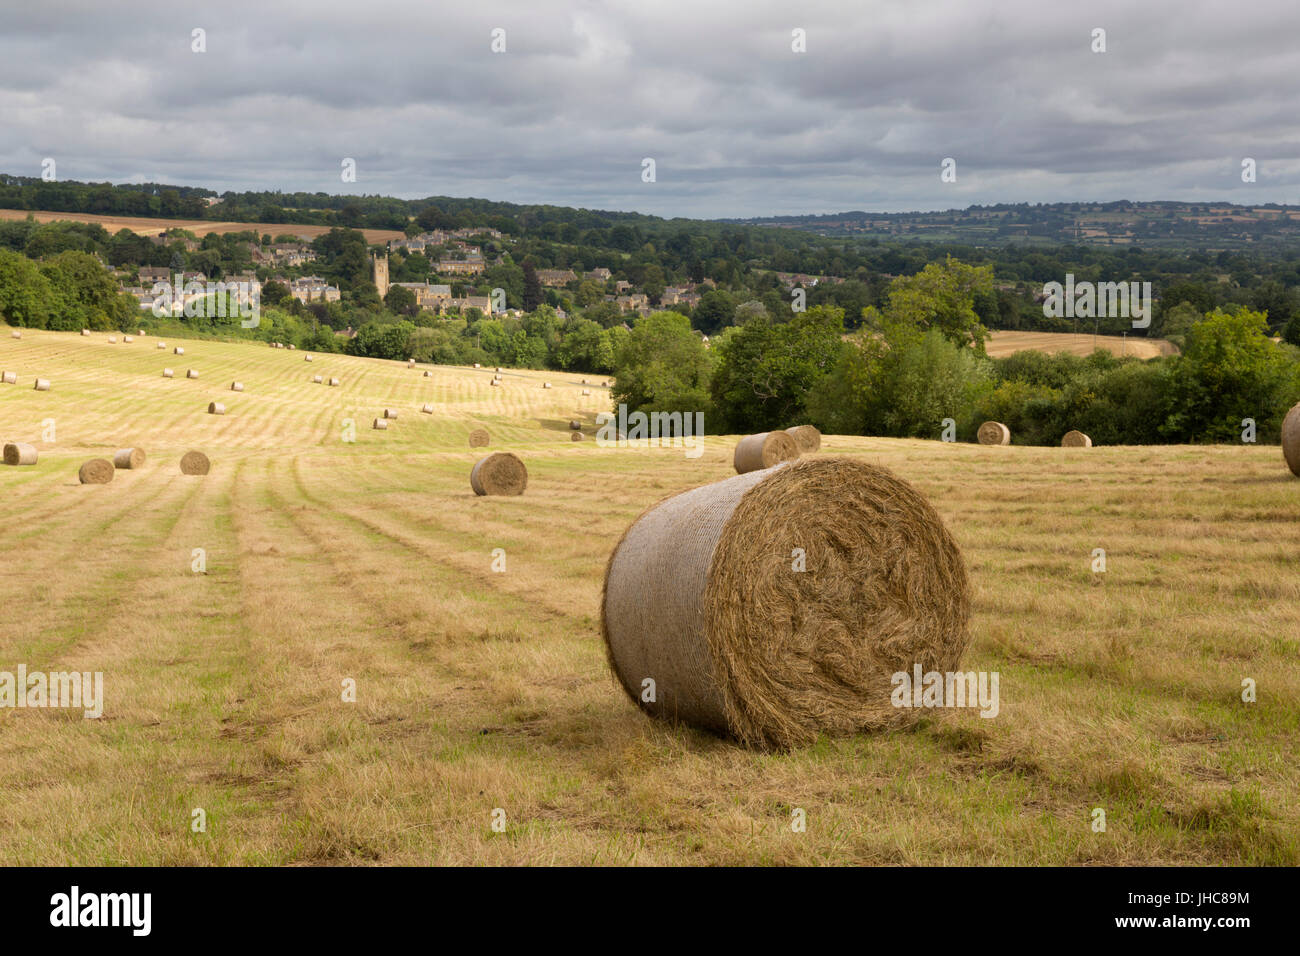 View over Cotswold village of Blockley with round hay bales, Blockley, Cotswolds, Gloucestershire, England, United Kingdom, Europe Stock Photo